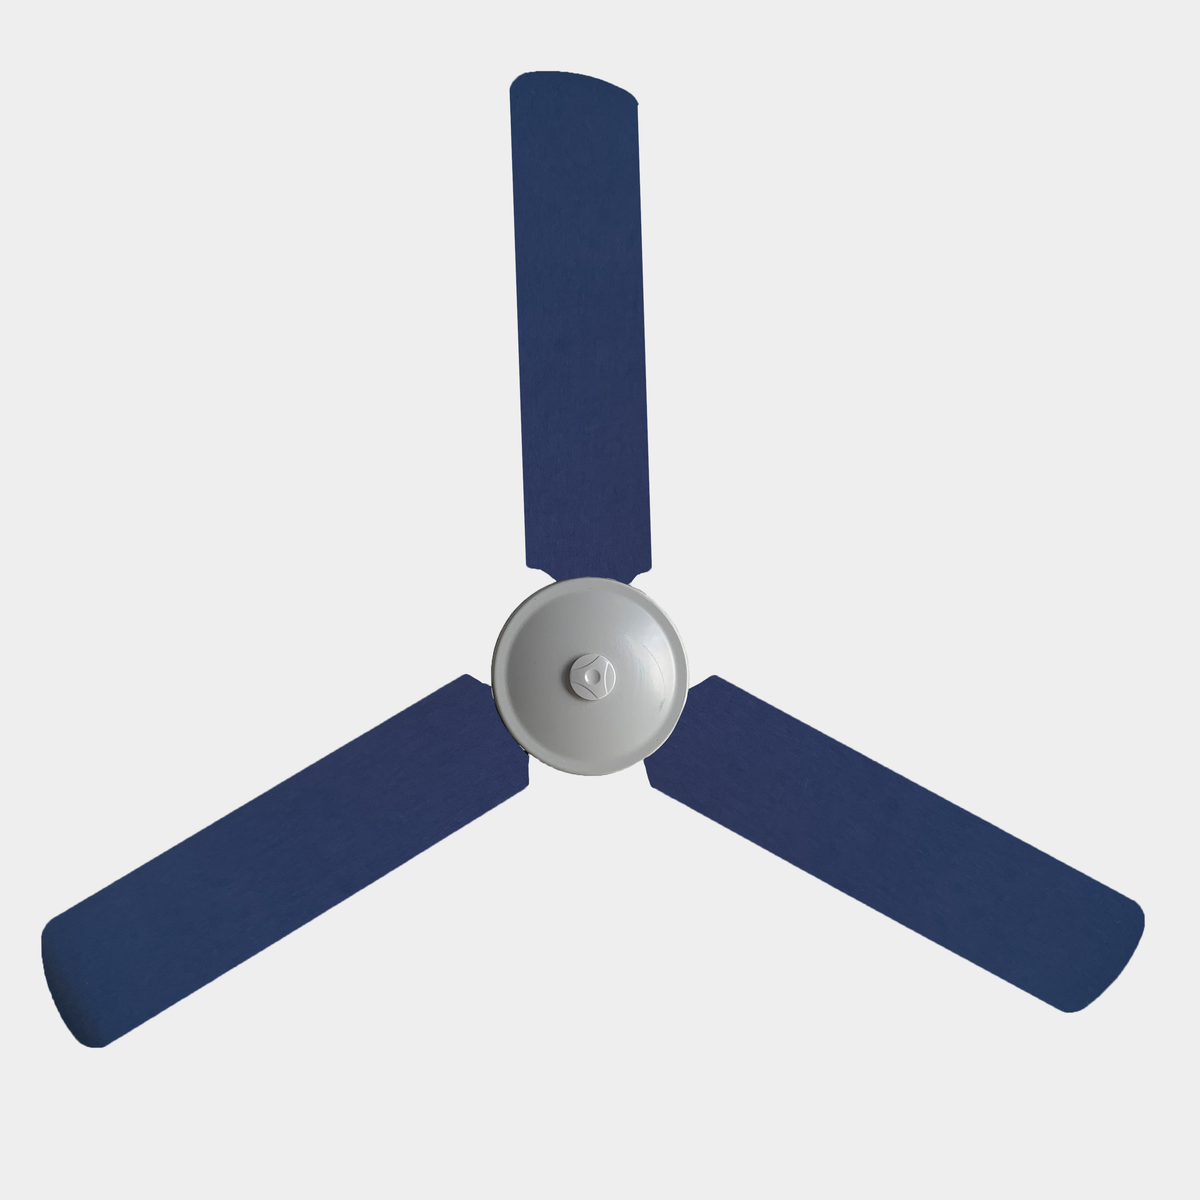 blade-arm-ceiling-fan-parts-at-lowes